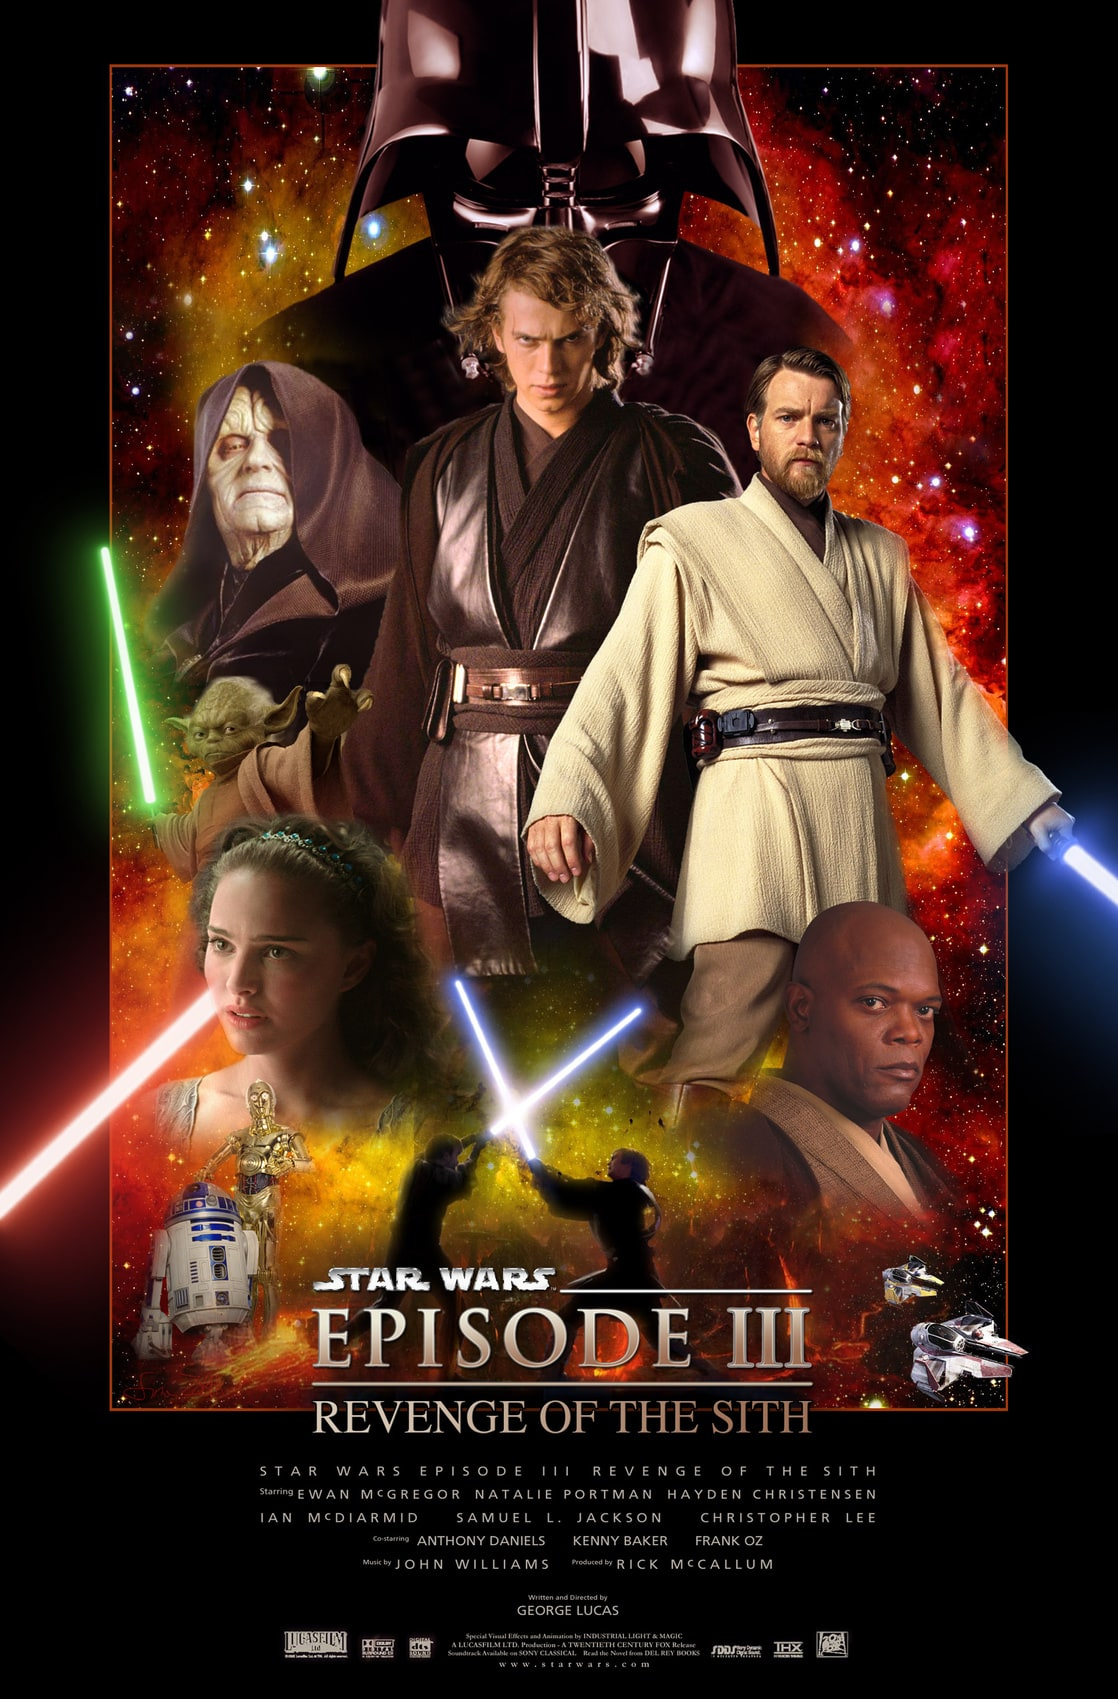 Picture Of Star Wars: Episode Iii - Revenge Of The Sith (2005) serapportantà Revenge Of The Sith Imdb